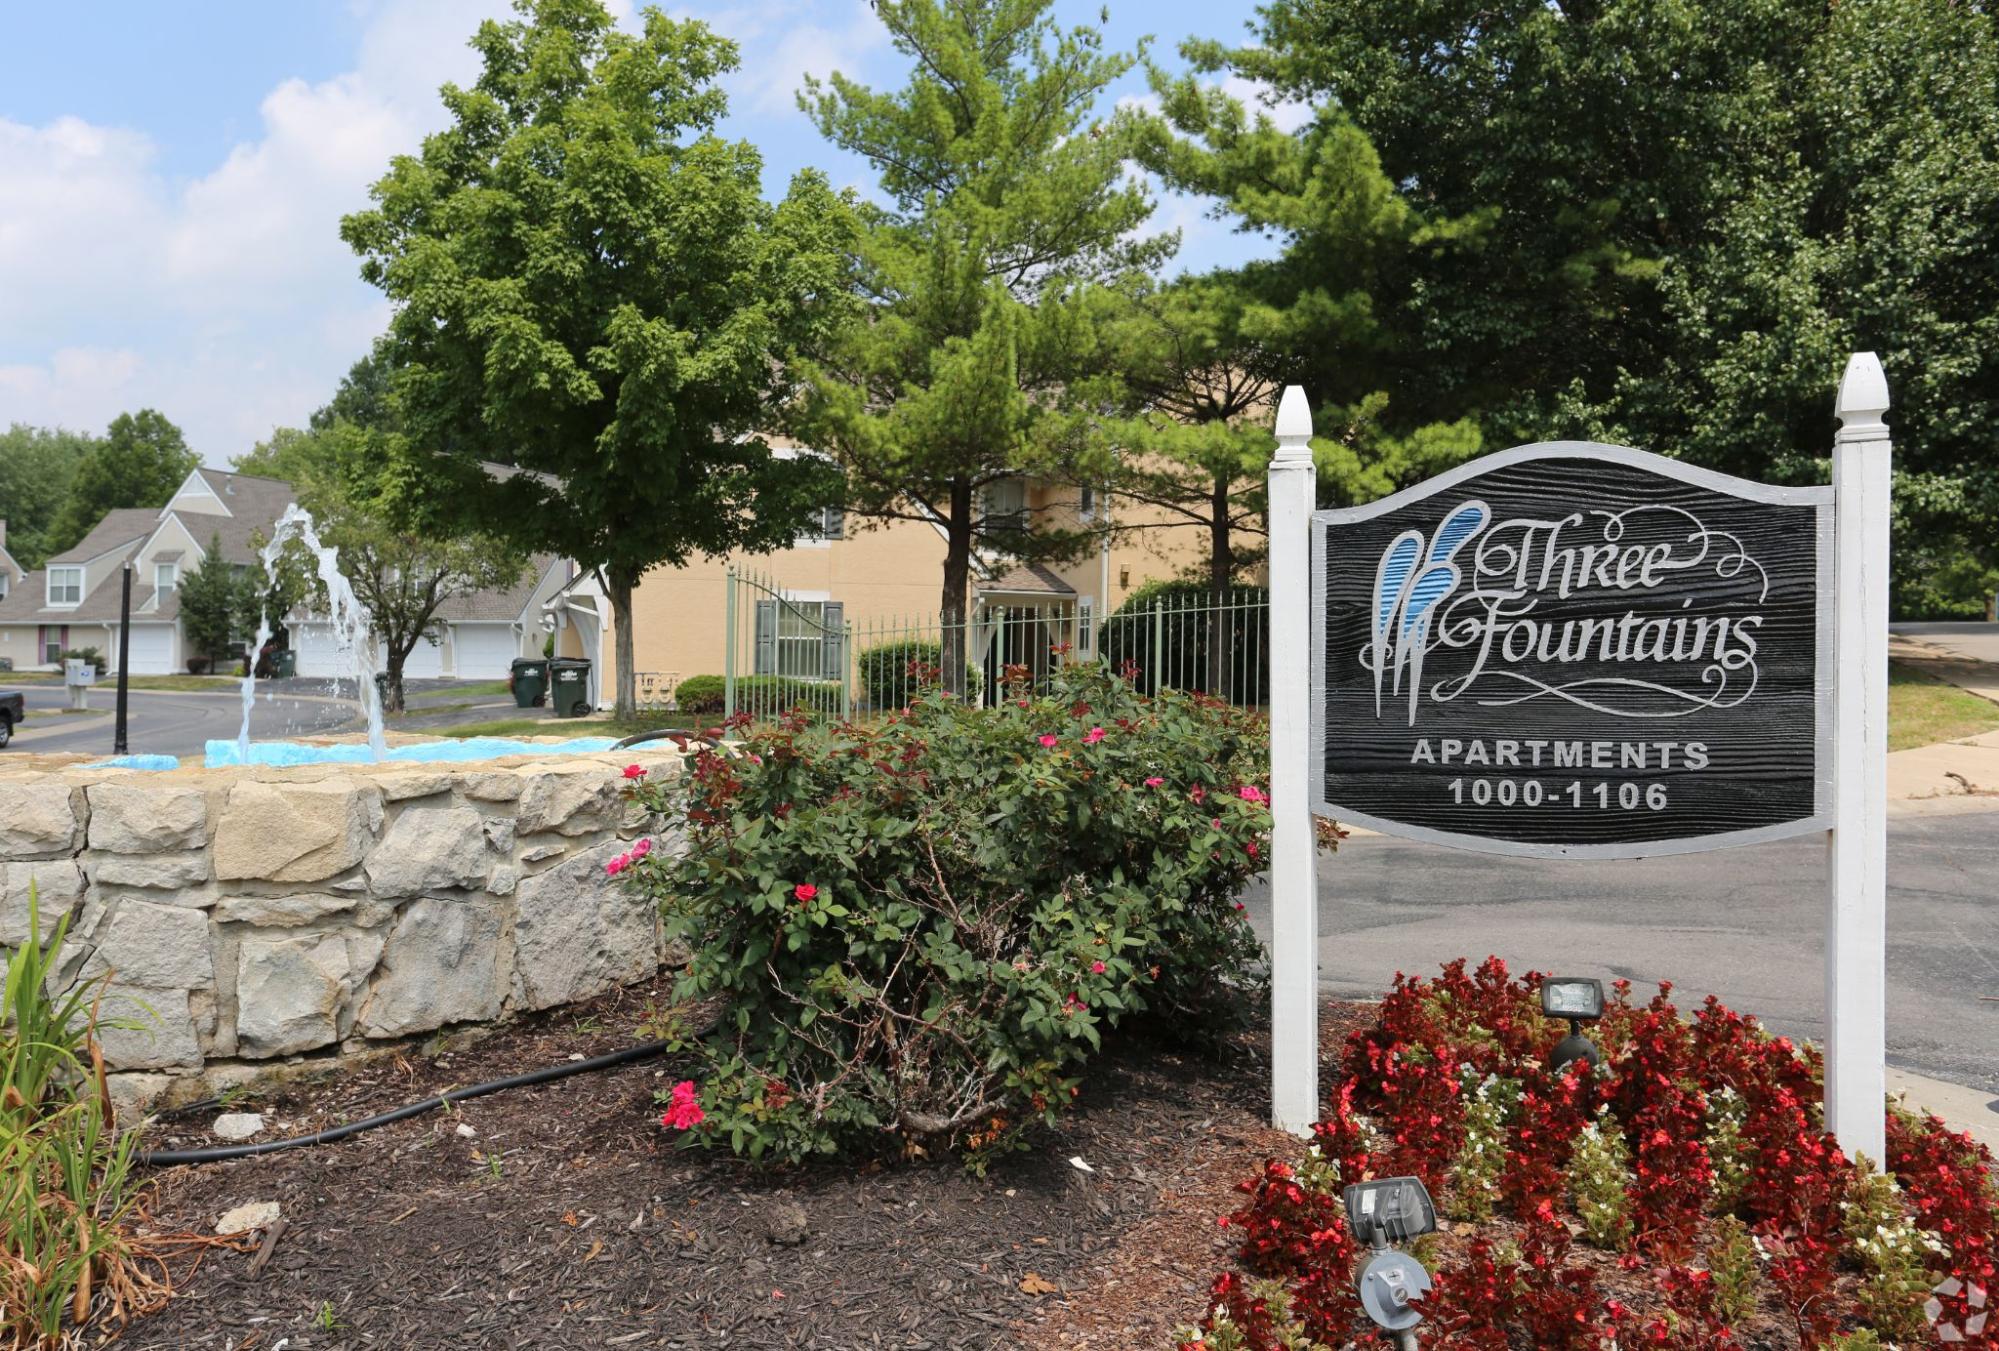 Cherry Tree Acquires Three Fountains Apartments in Kansas City for $29M